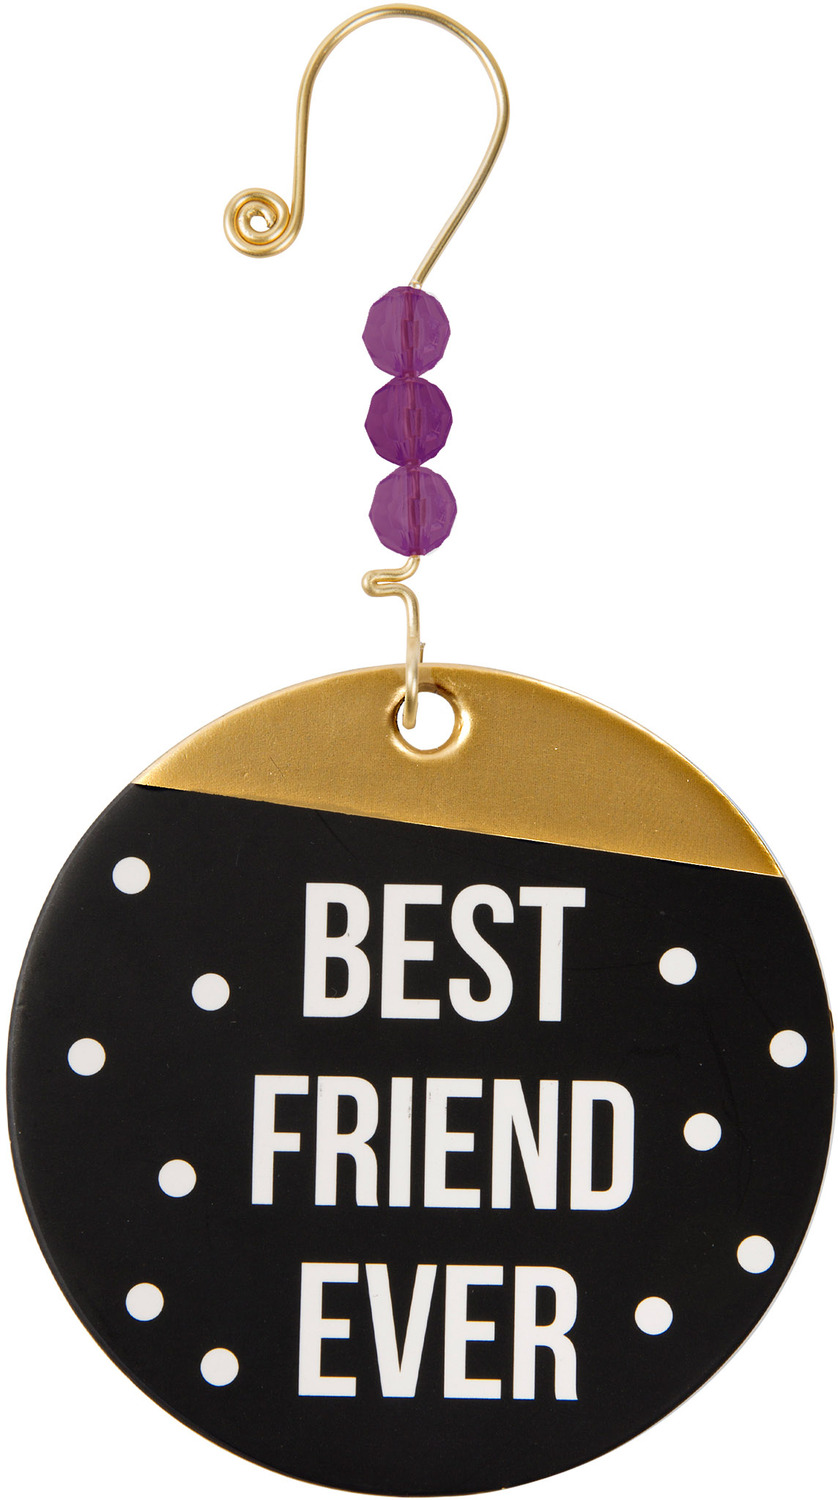 Best Friend Ever by Girlfinds - Best Friend Ever - 3.5" Paper Ornament